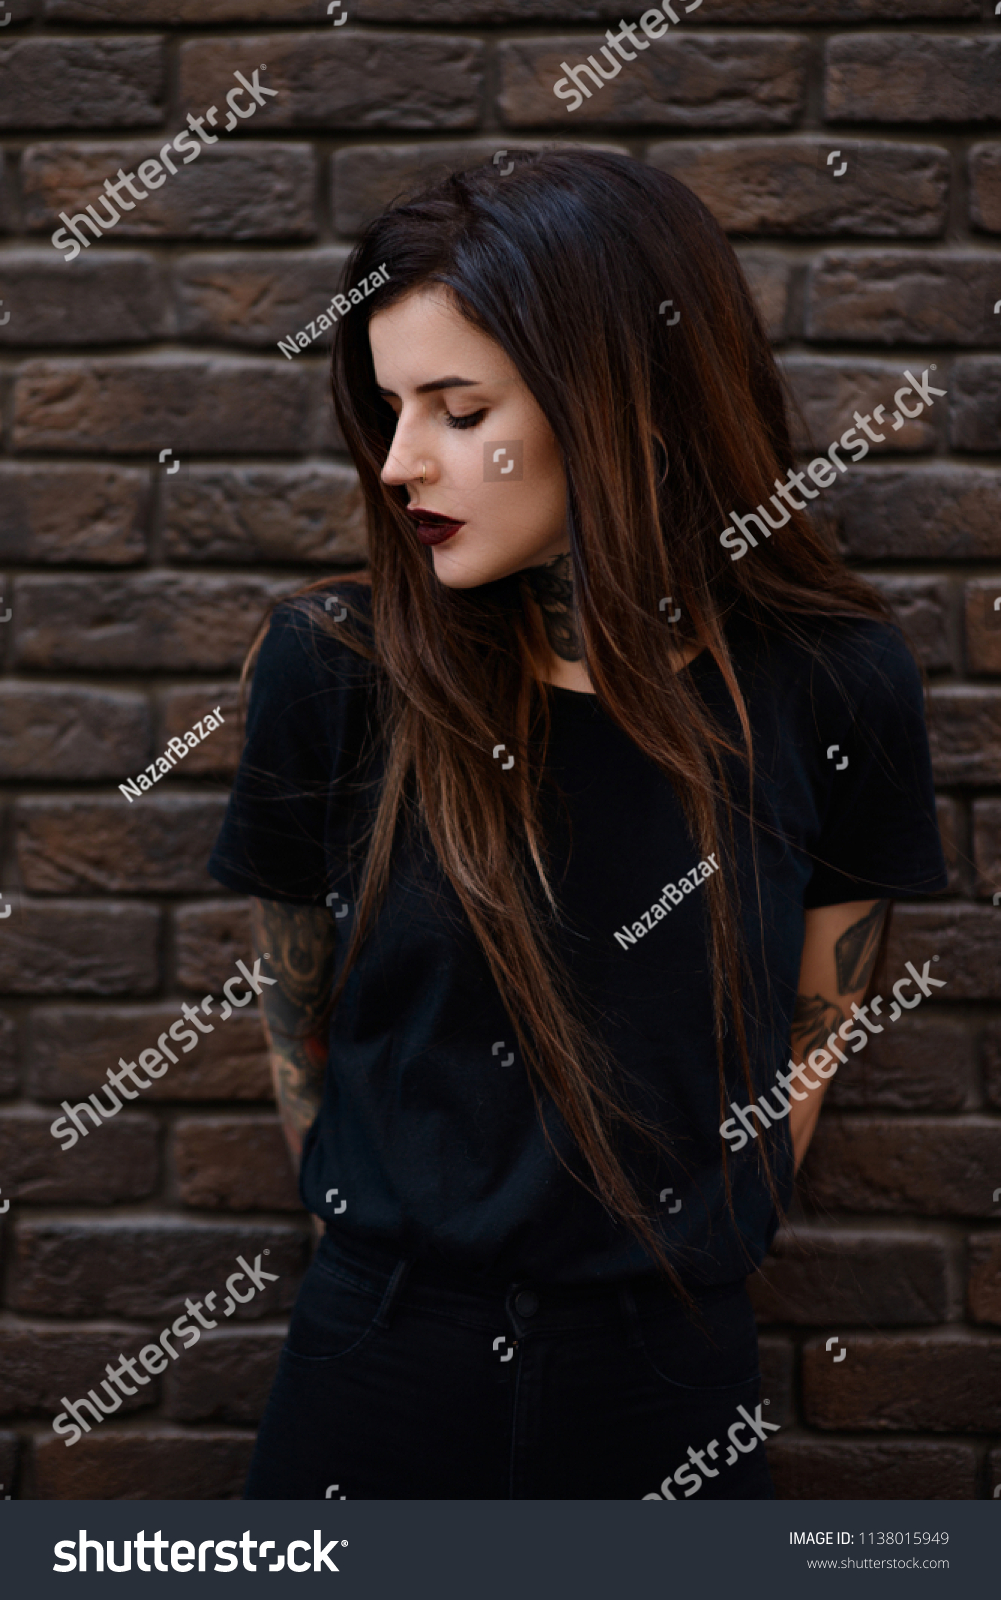 Female model with tattoos, piercing in nose, black lips and long brunette hair. Beautiful slim girl with tattoos wearing black t shirt and jeans standing against the stone wall or brick fence. #1138015949